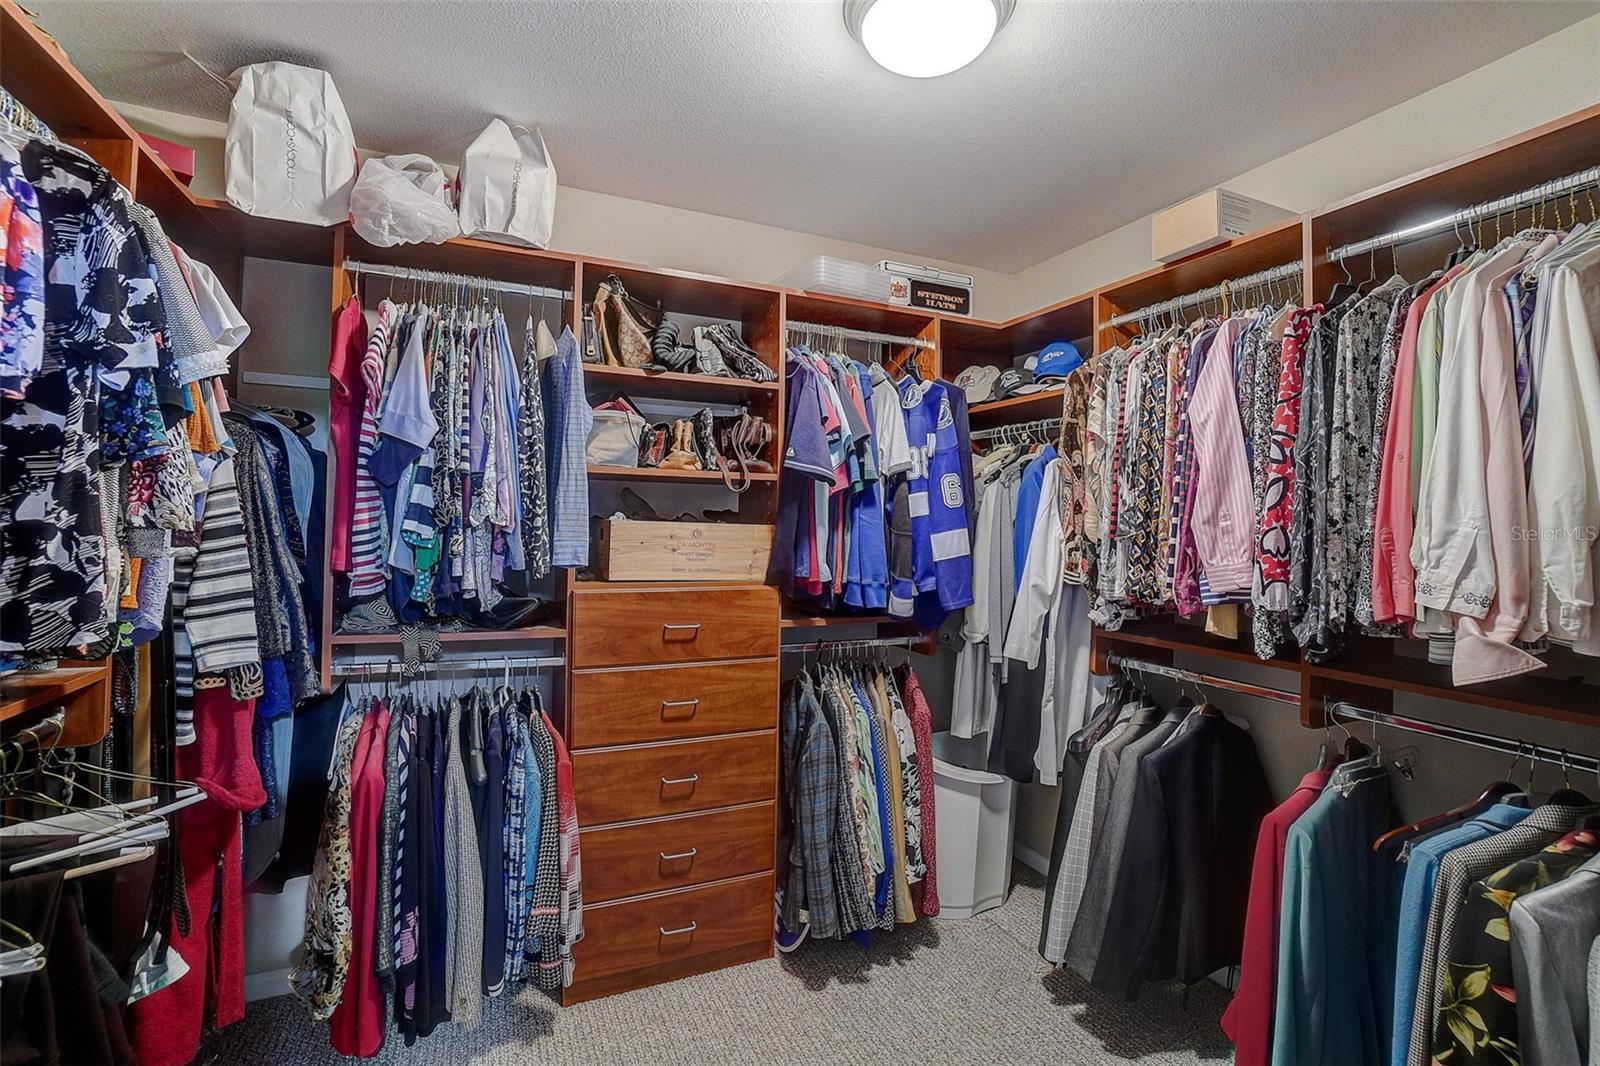 ONLY ONE OF THE WALK-IN CLOSETS